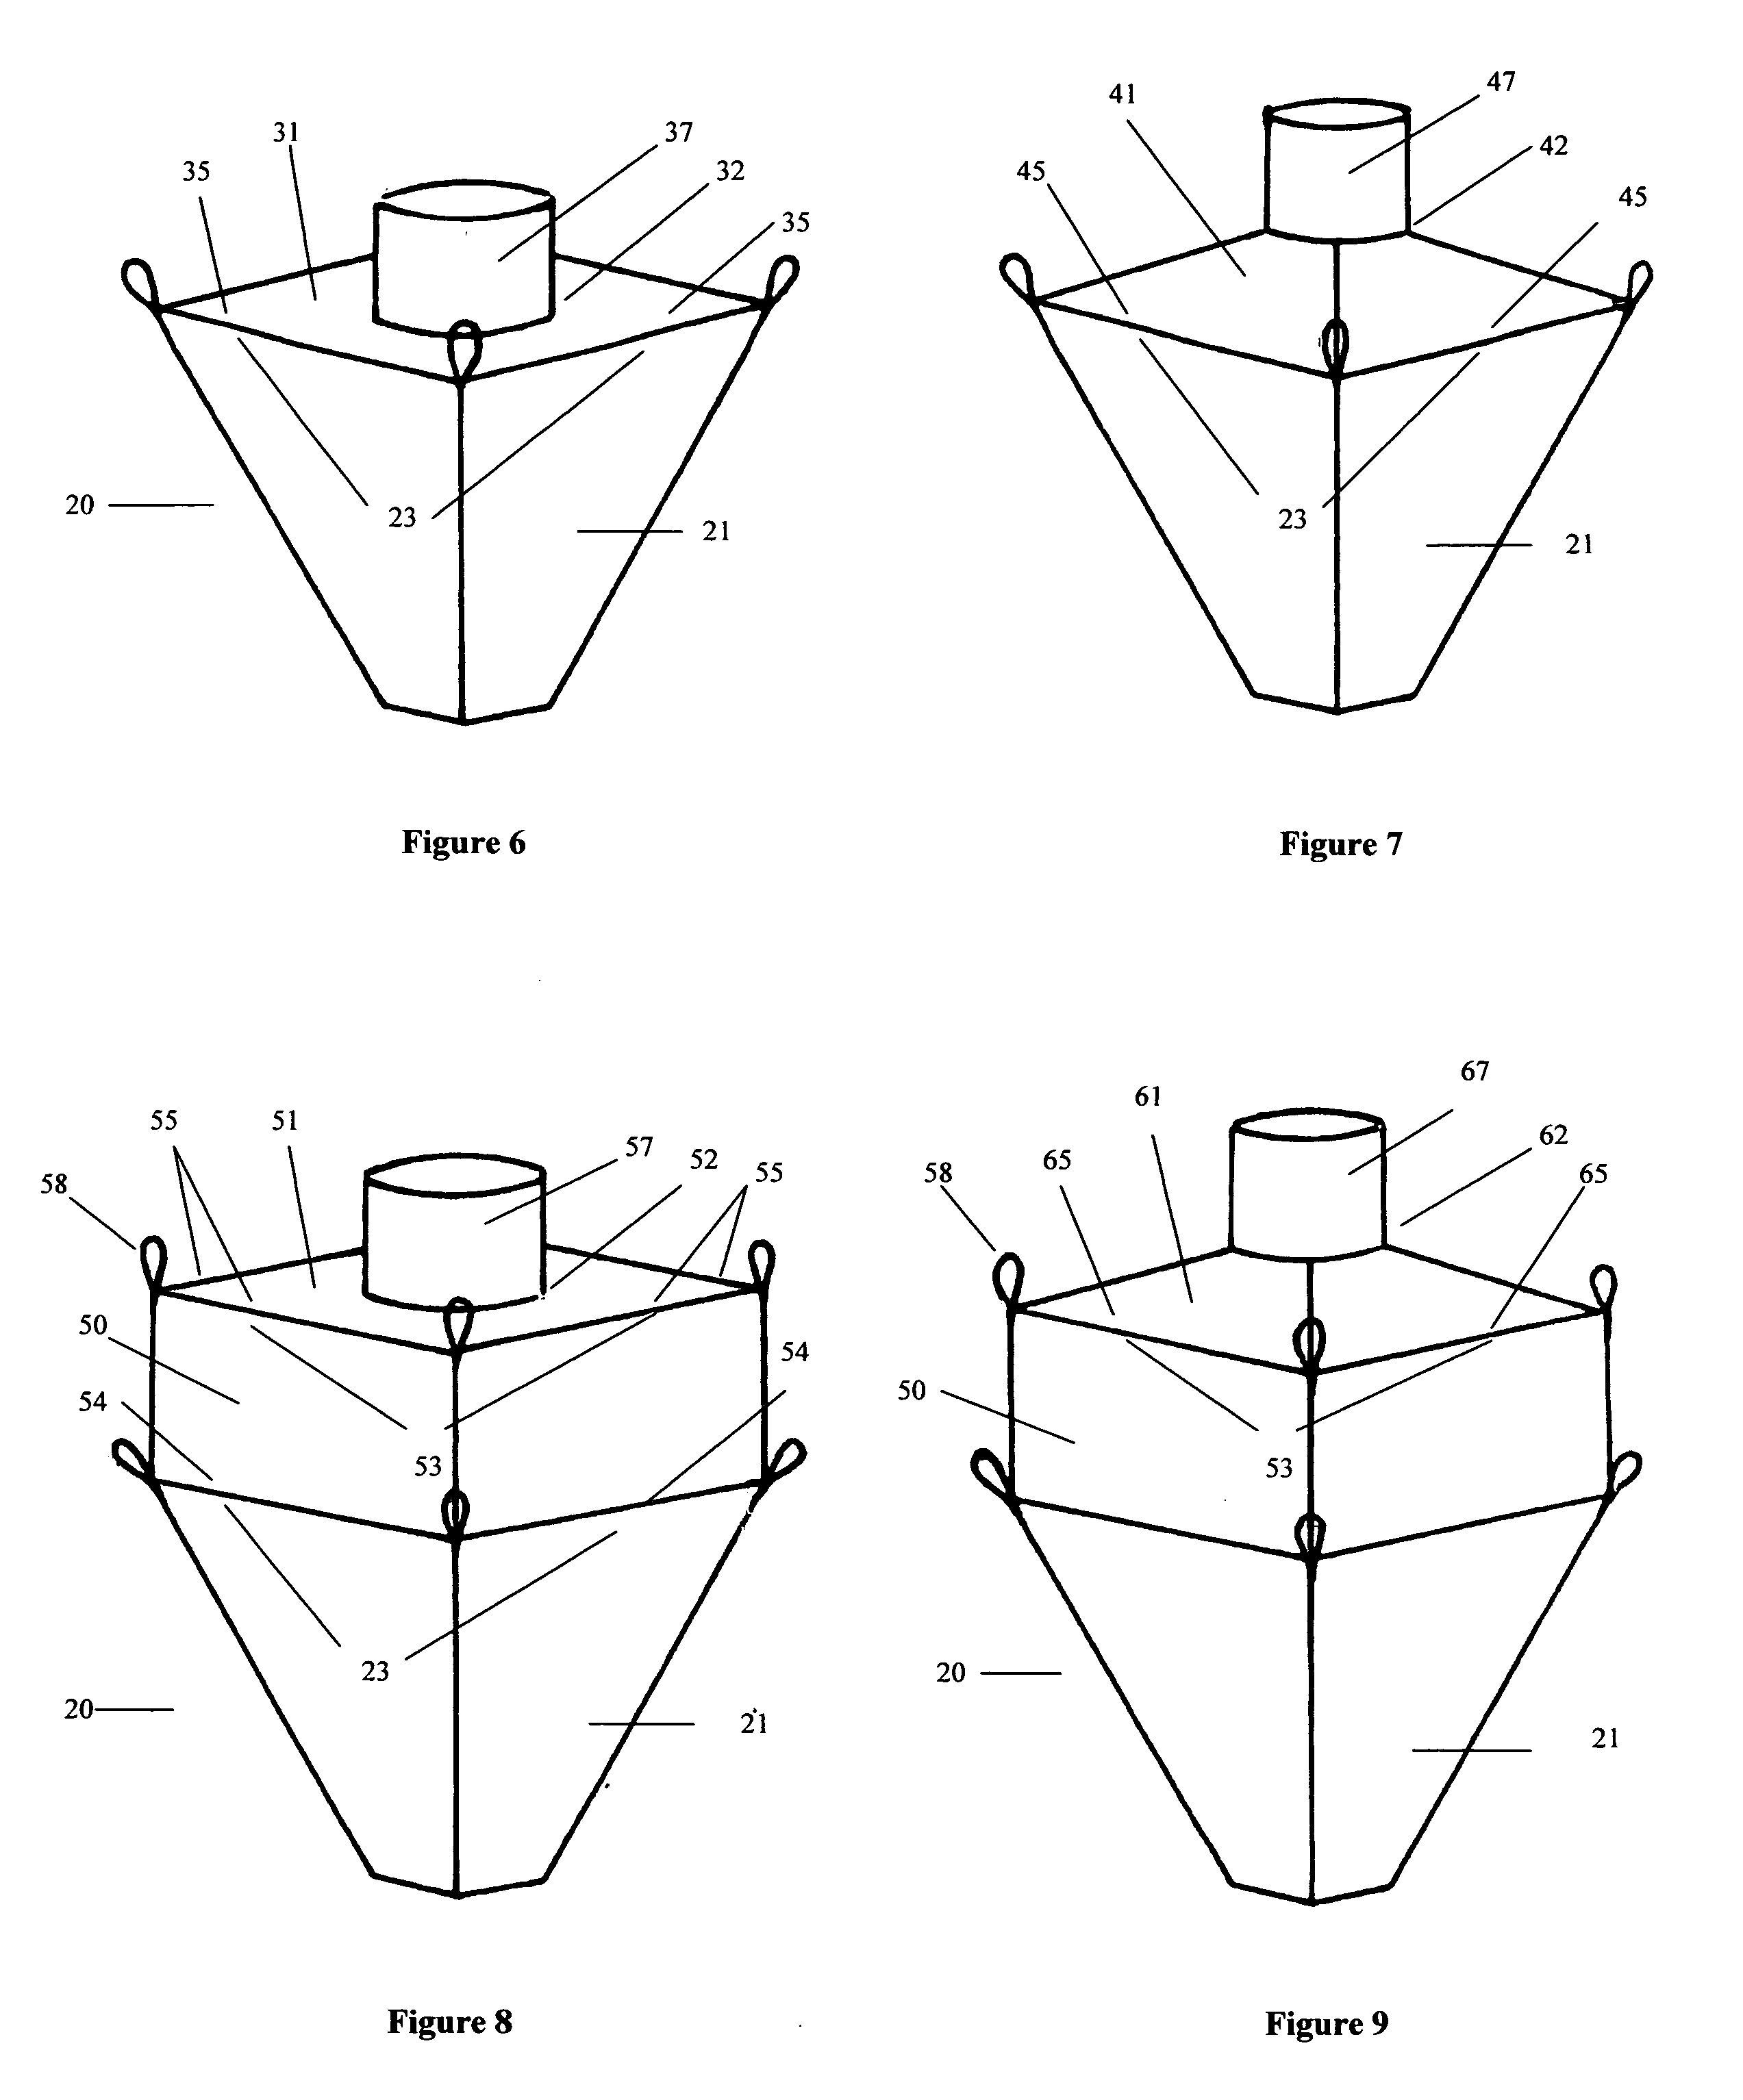 Article of manufacture for a flexible silo